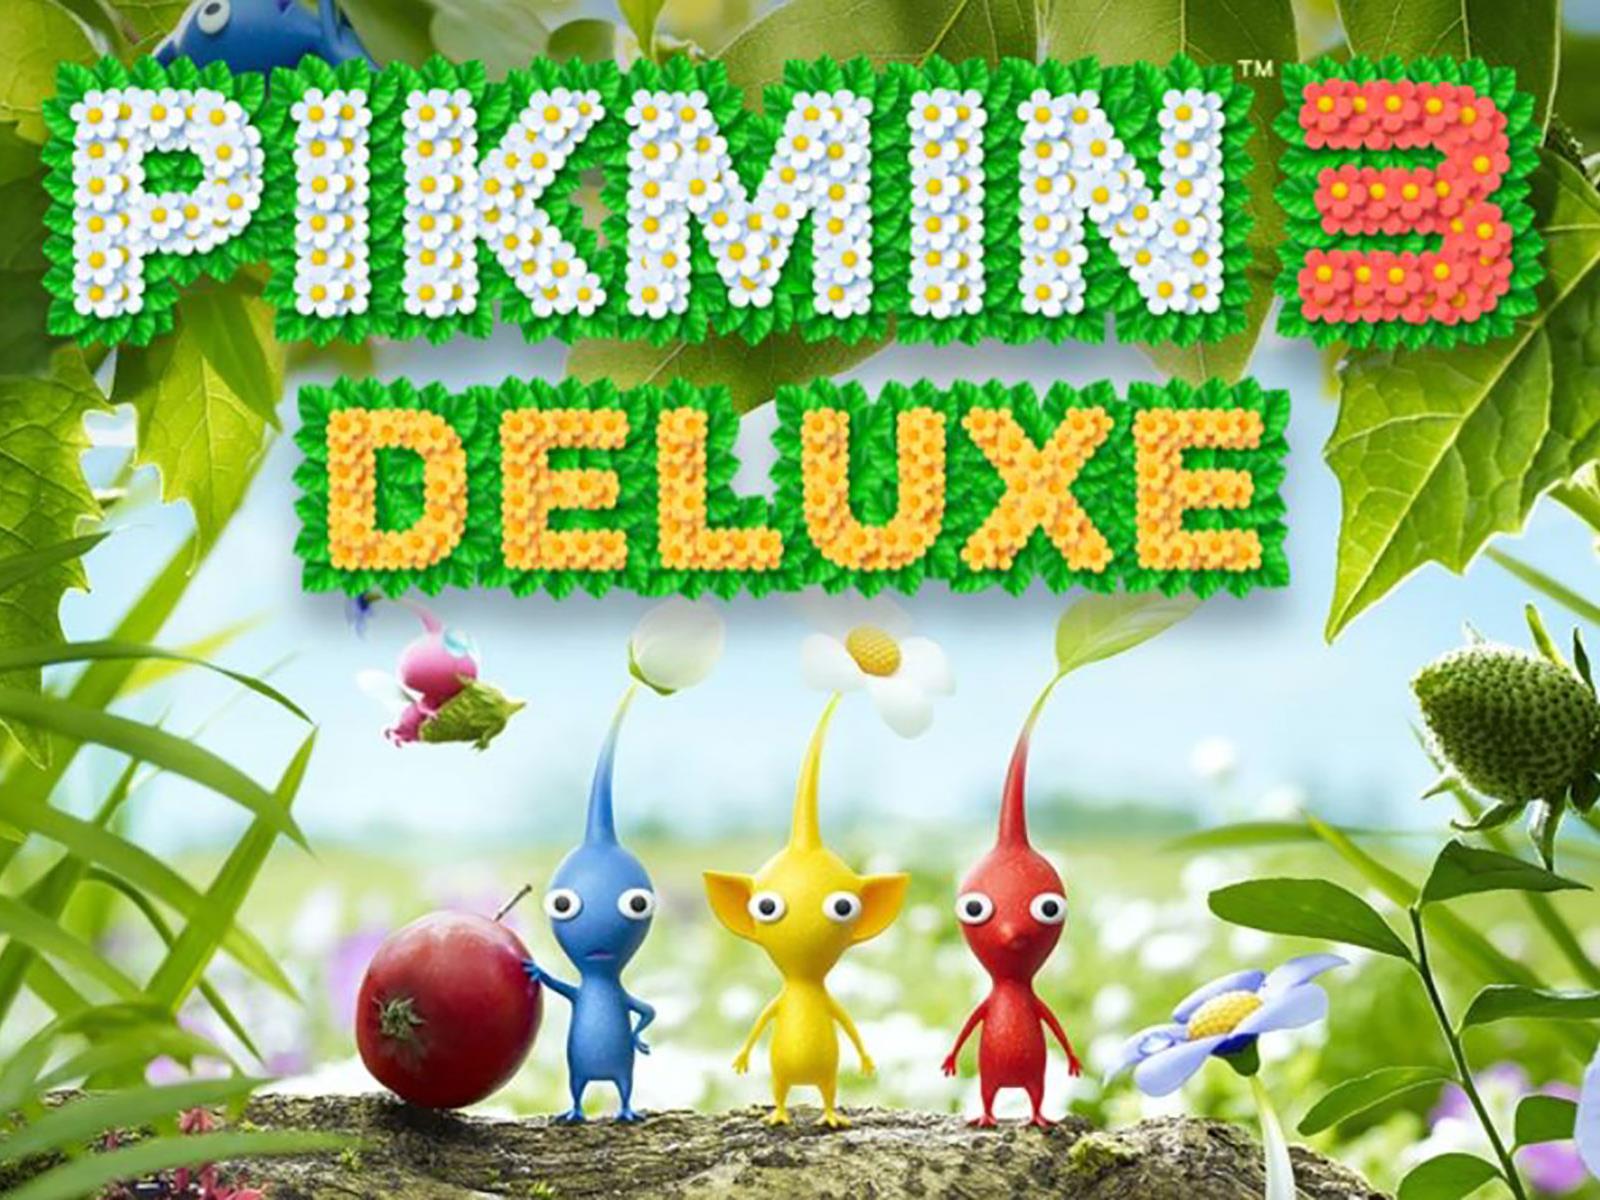 Pikmin 3 Deluxe Headed To Nintendo Switch In October With New Missions